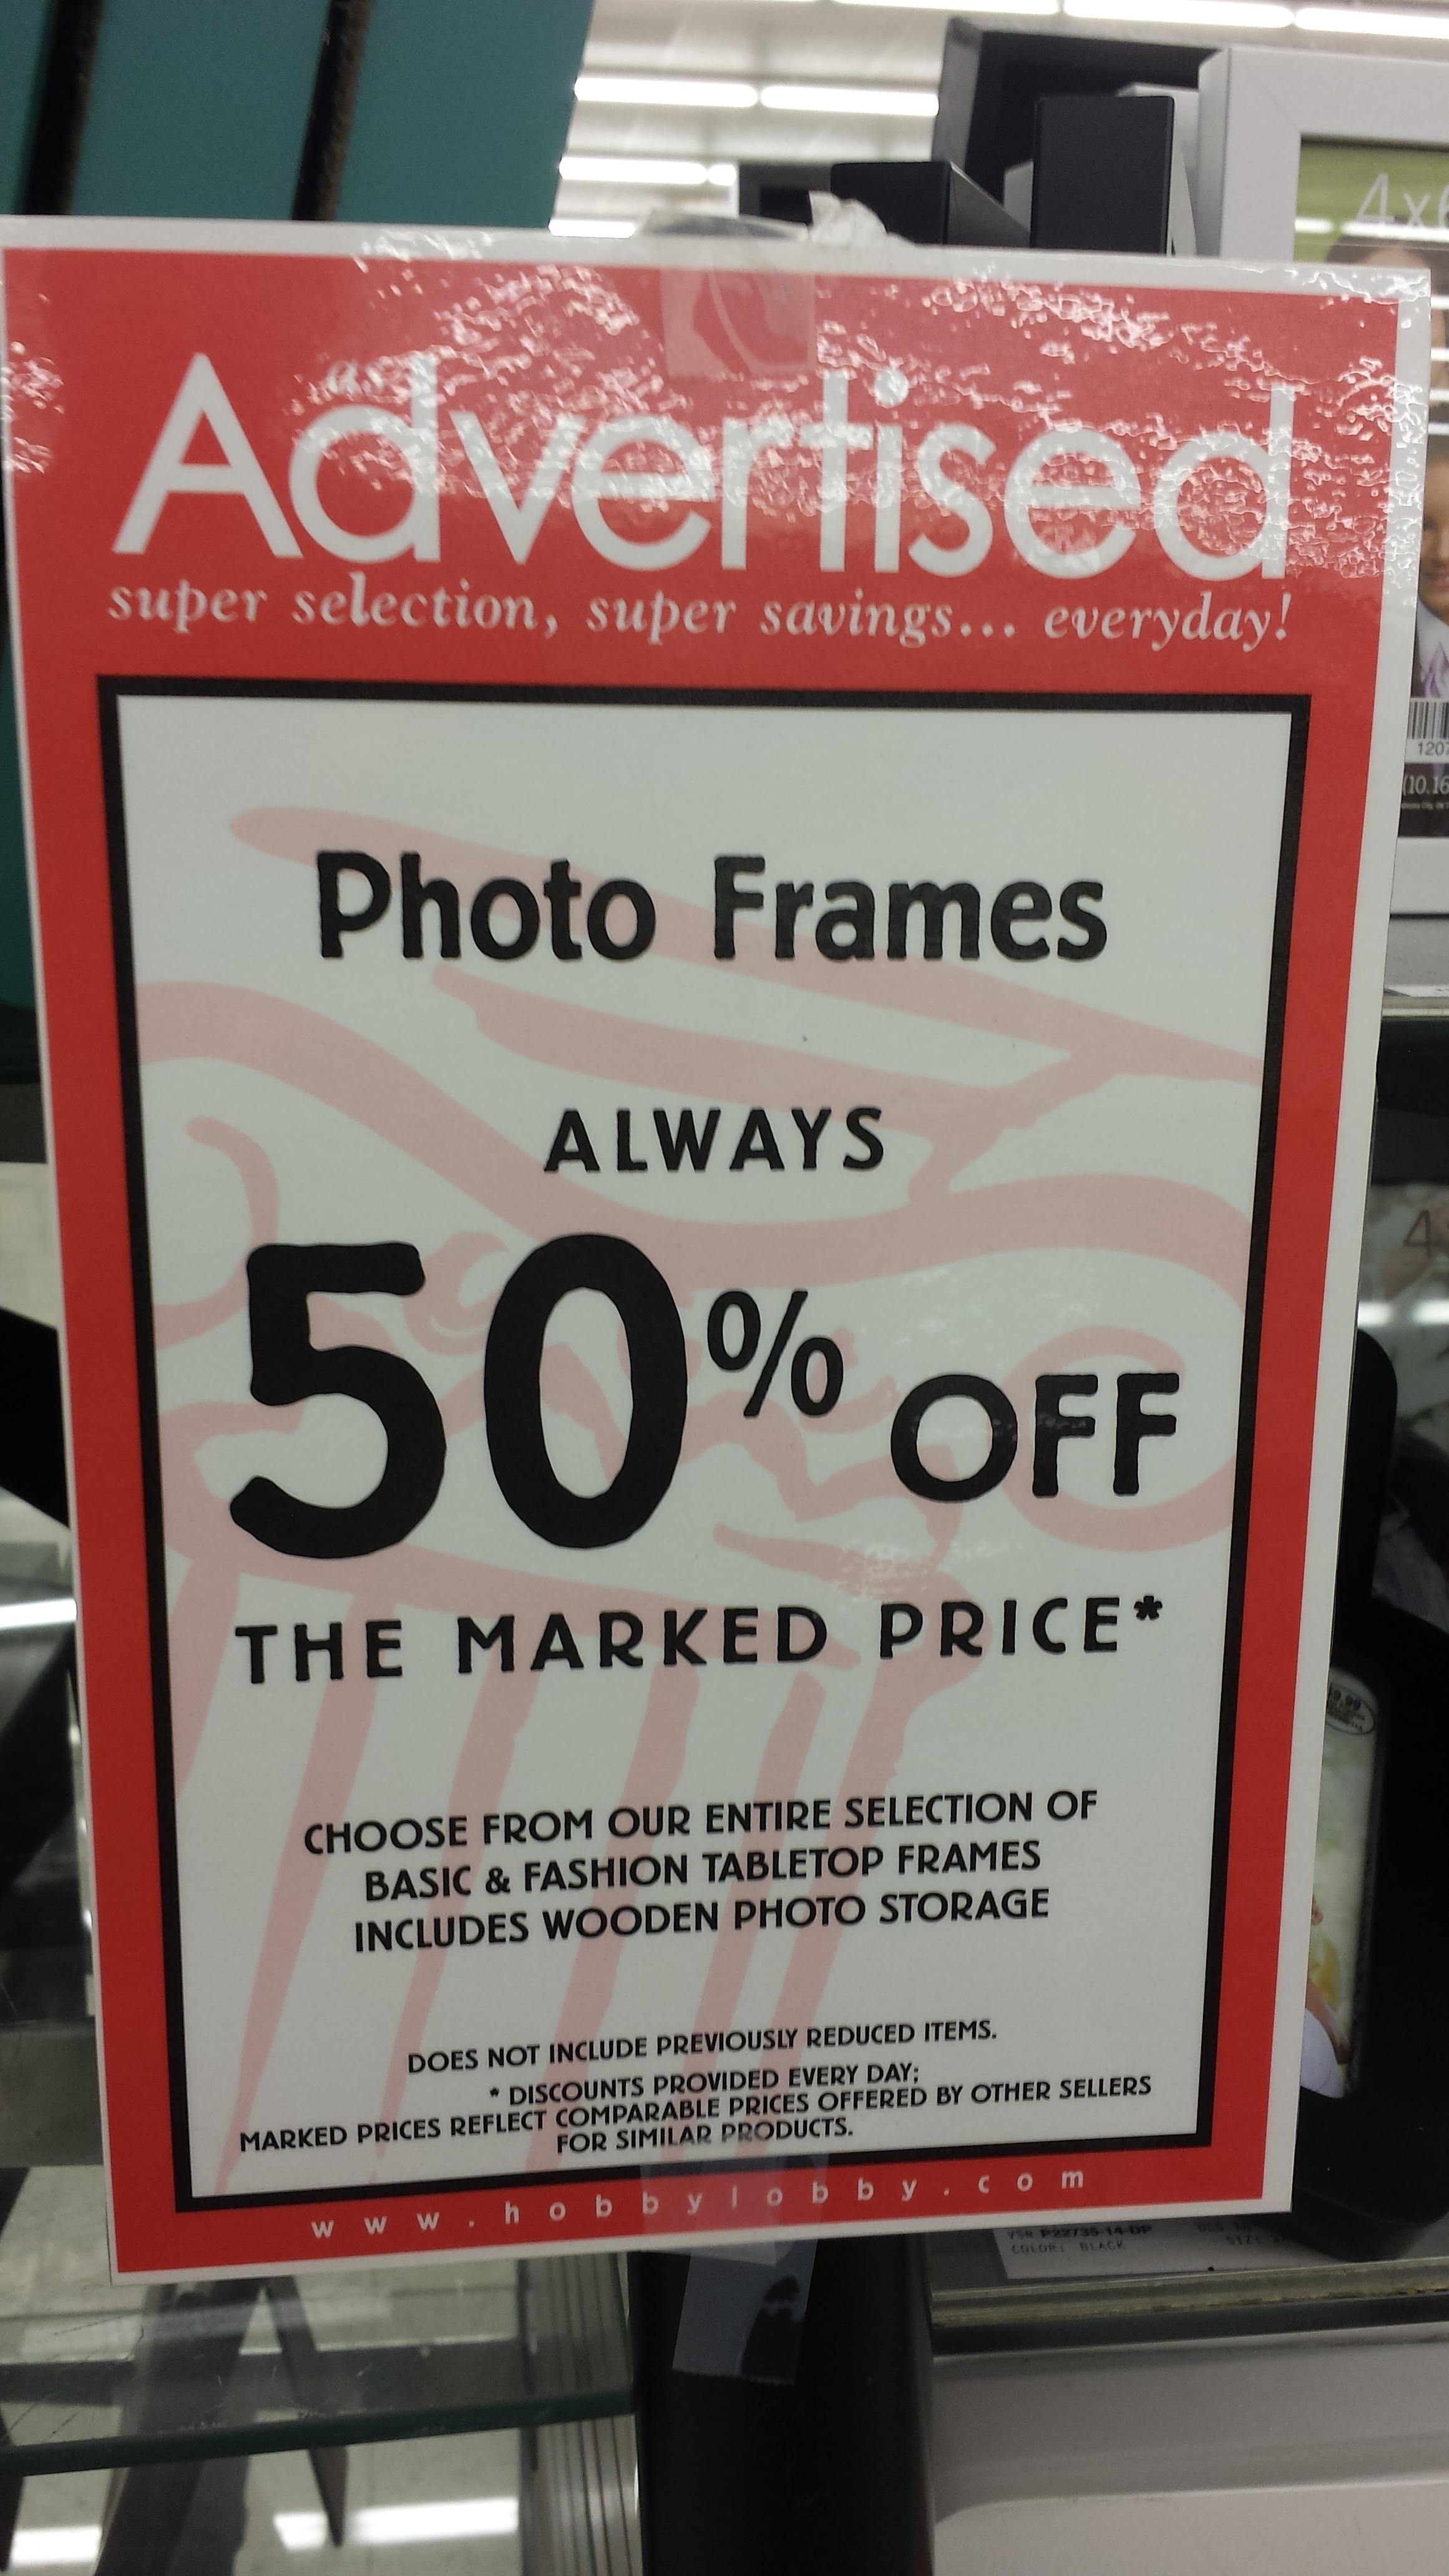 ricoh - Advertised super selection, super savings... eteryday! Photo Frames Always 50% Off The Marked Price Choose From Our Entire Selection Of Basic & Fashion Tabletop Frames Includes Wooden Photo Storage Does Notic Heroes Cor K Ets Rest onere si